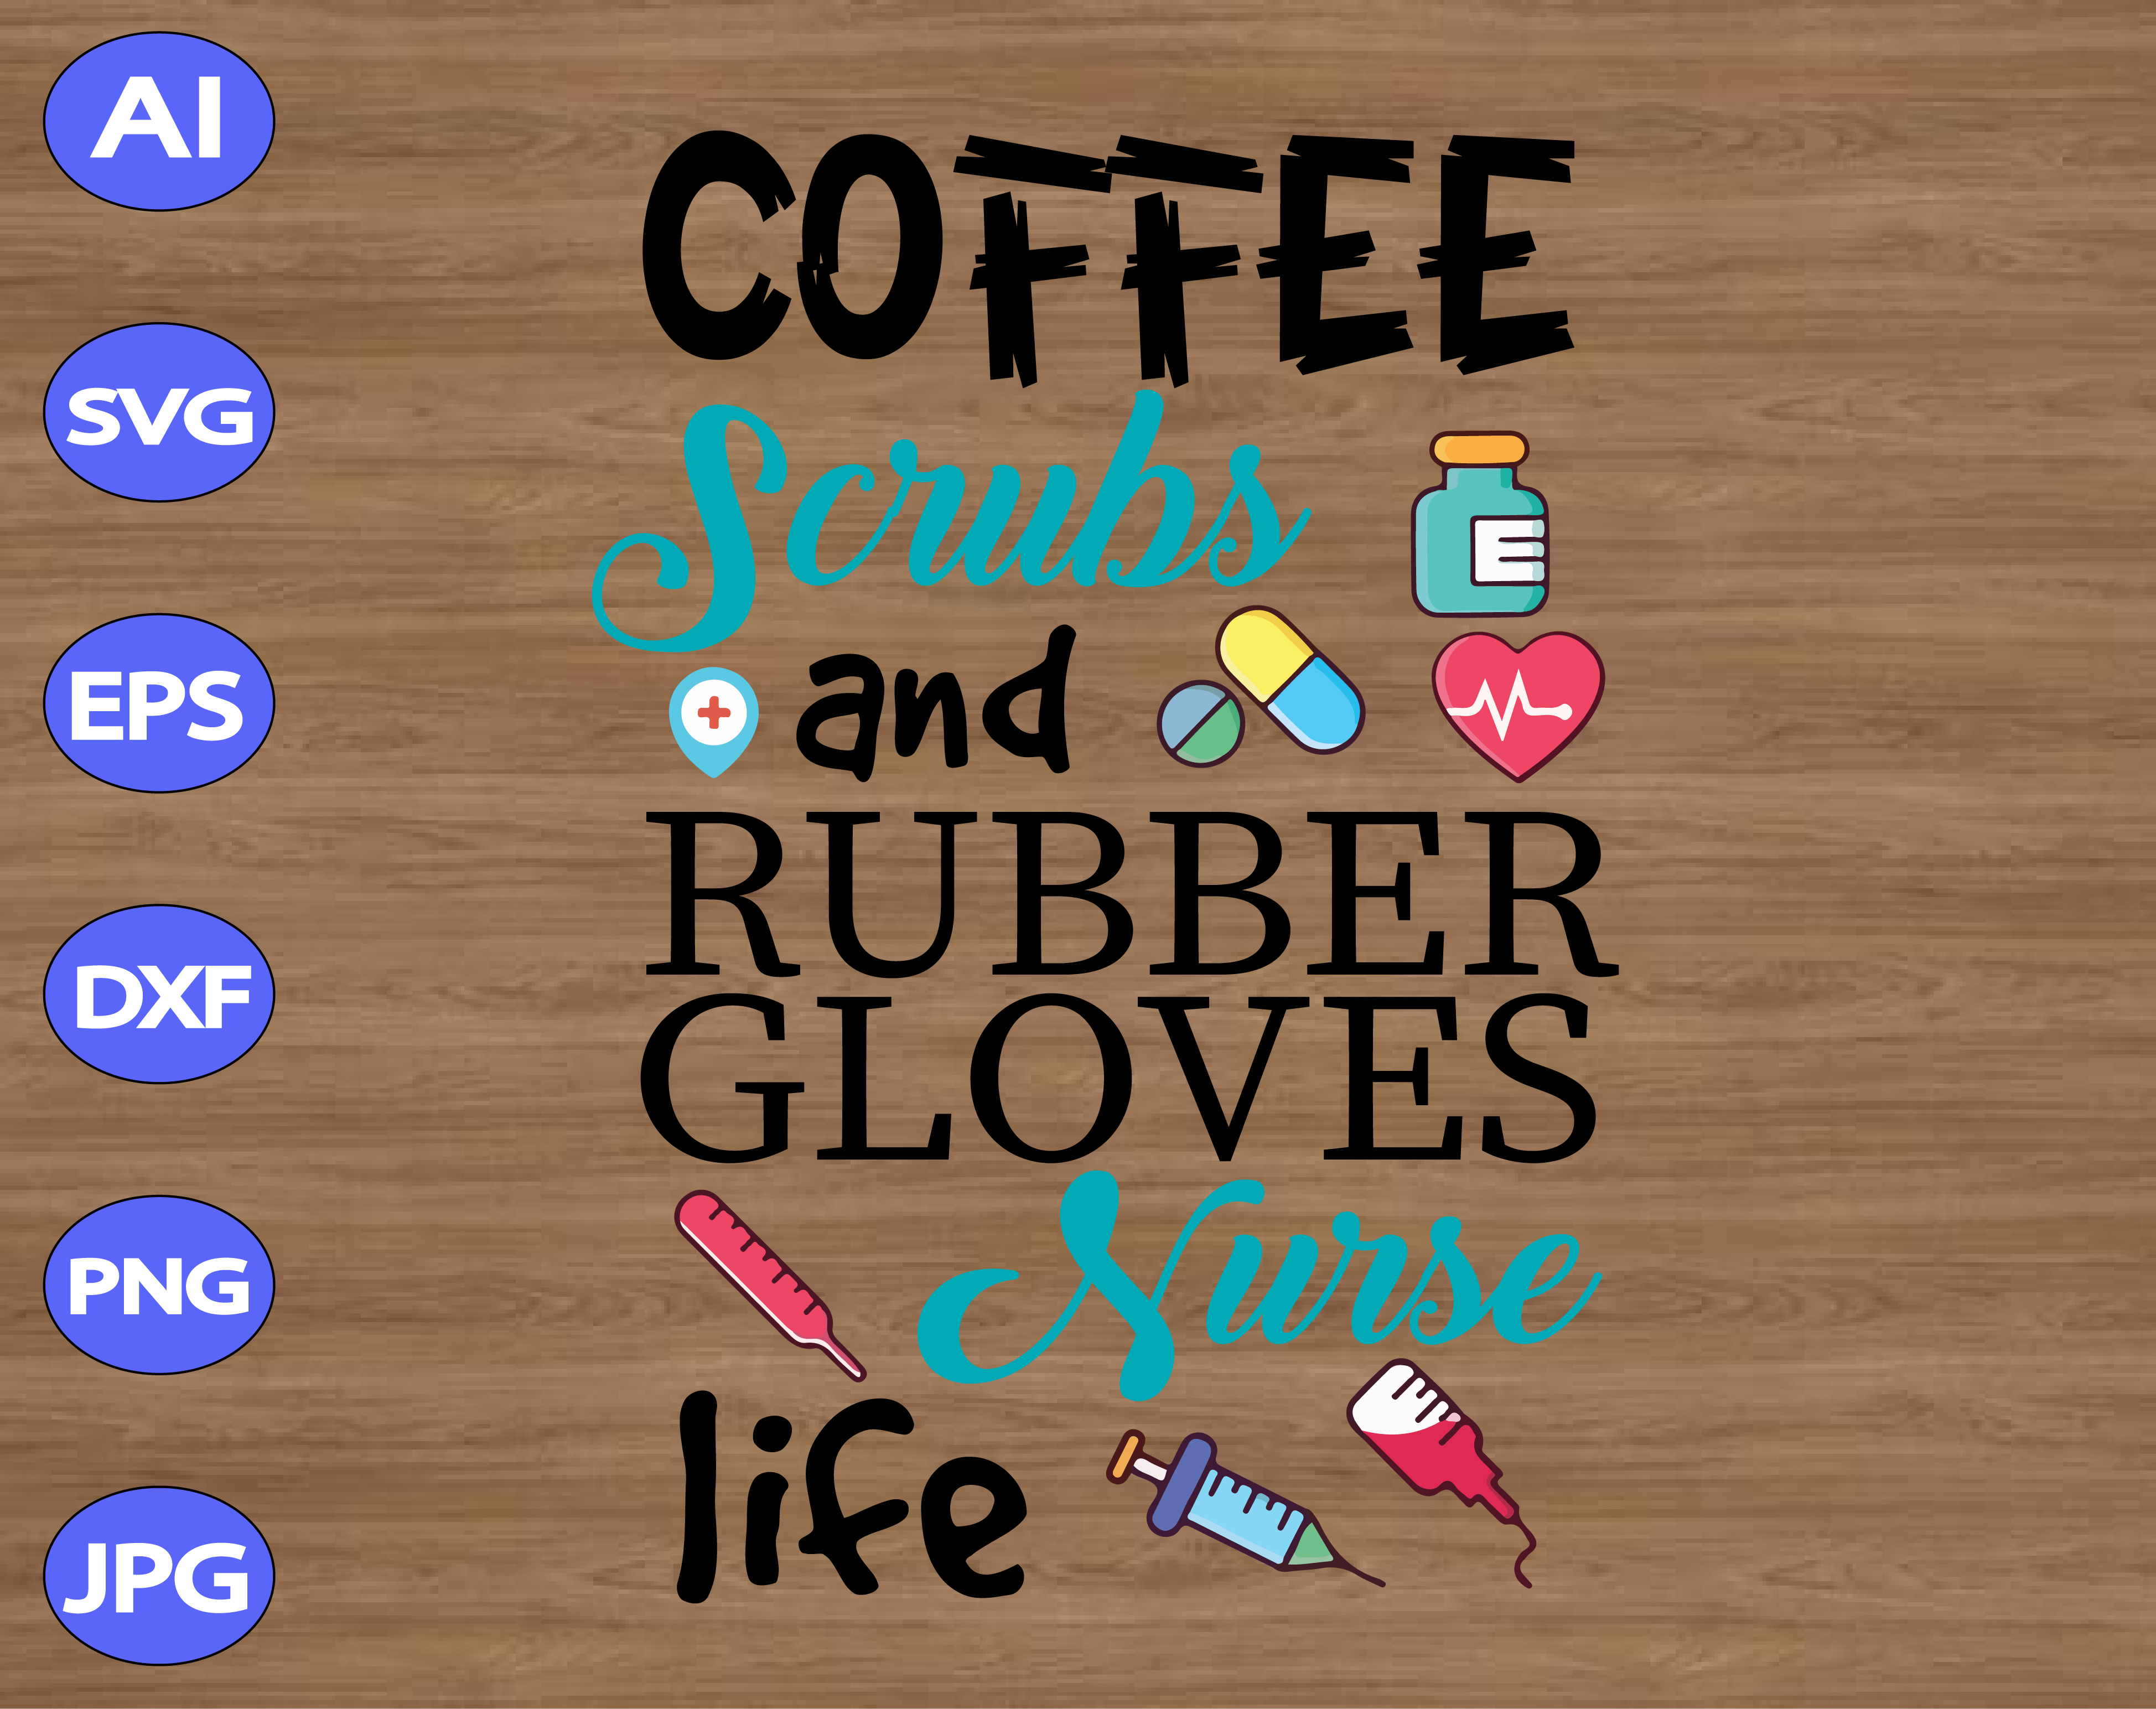 Download Coffee Scrubs Rubber Gloves Svg Nurselife Digital Download Svg Png Jpg Dxf Eps Instant Download Cutting Files For Cricut Silhouette Cameo Paper Party Kids Craft Supplies Tools Kromasol Com